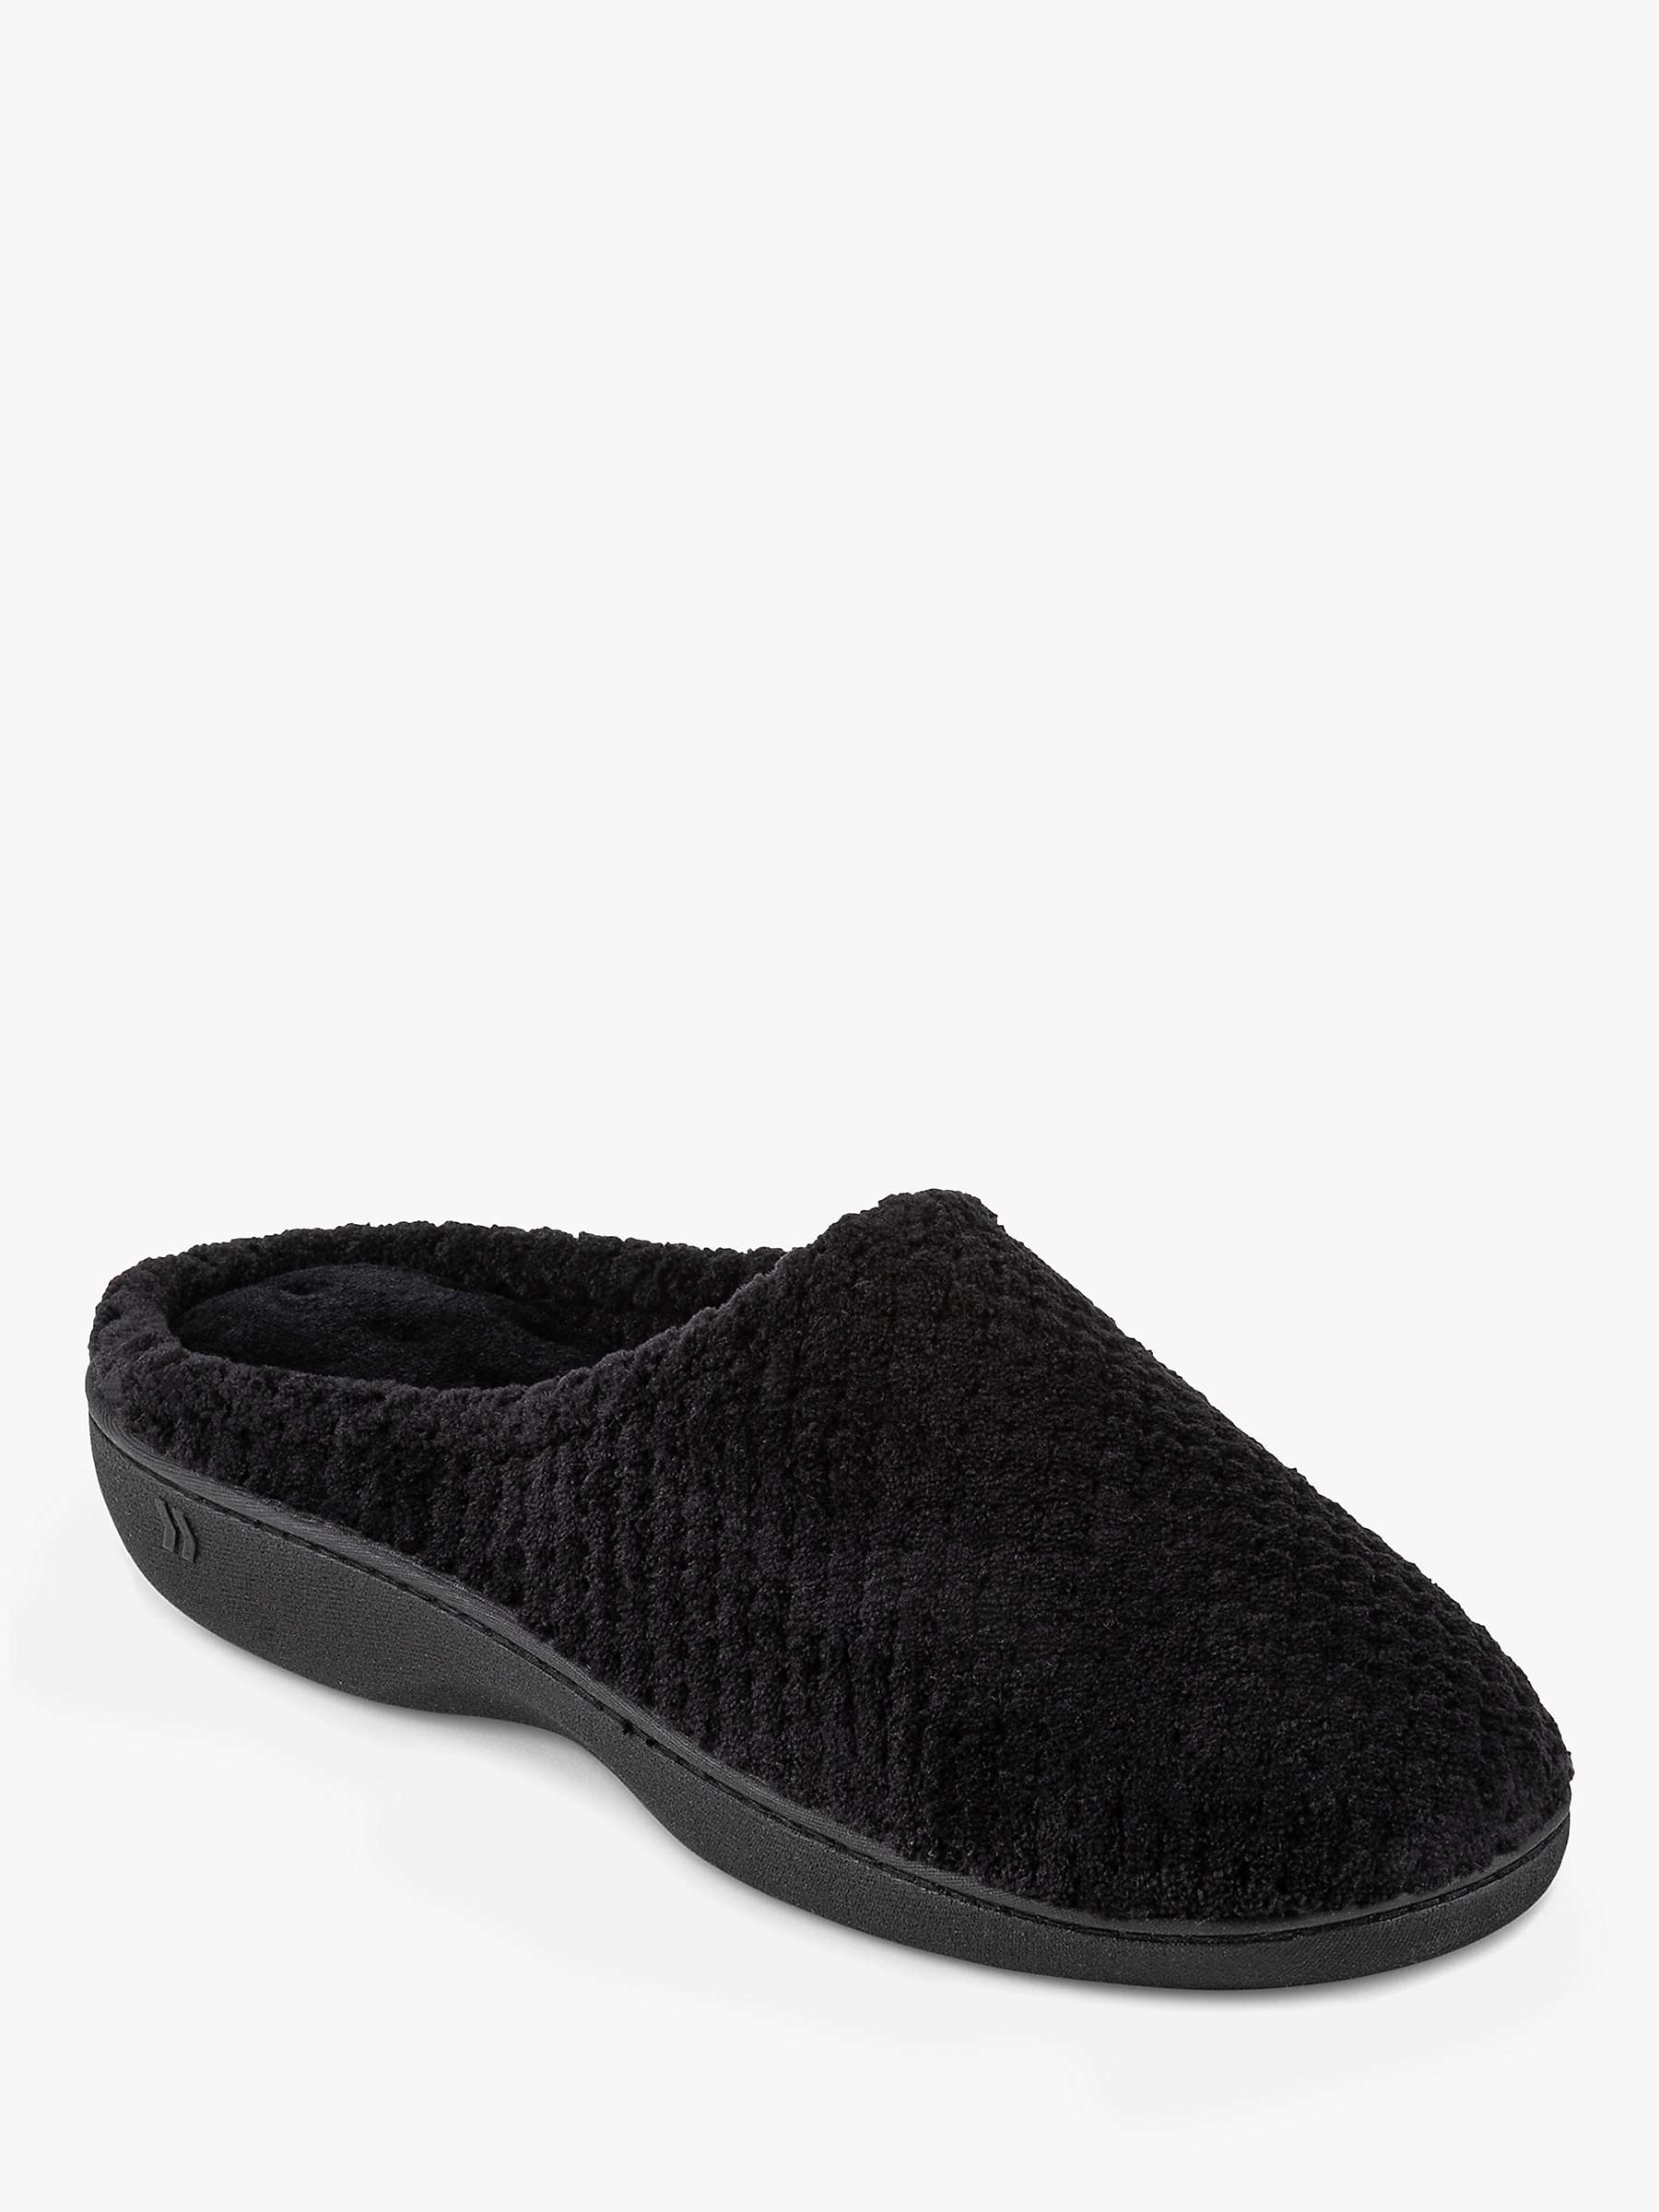 totes Popcorn Terry Mule Slippers, Black at John Lewis & Partners